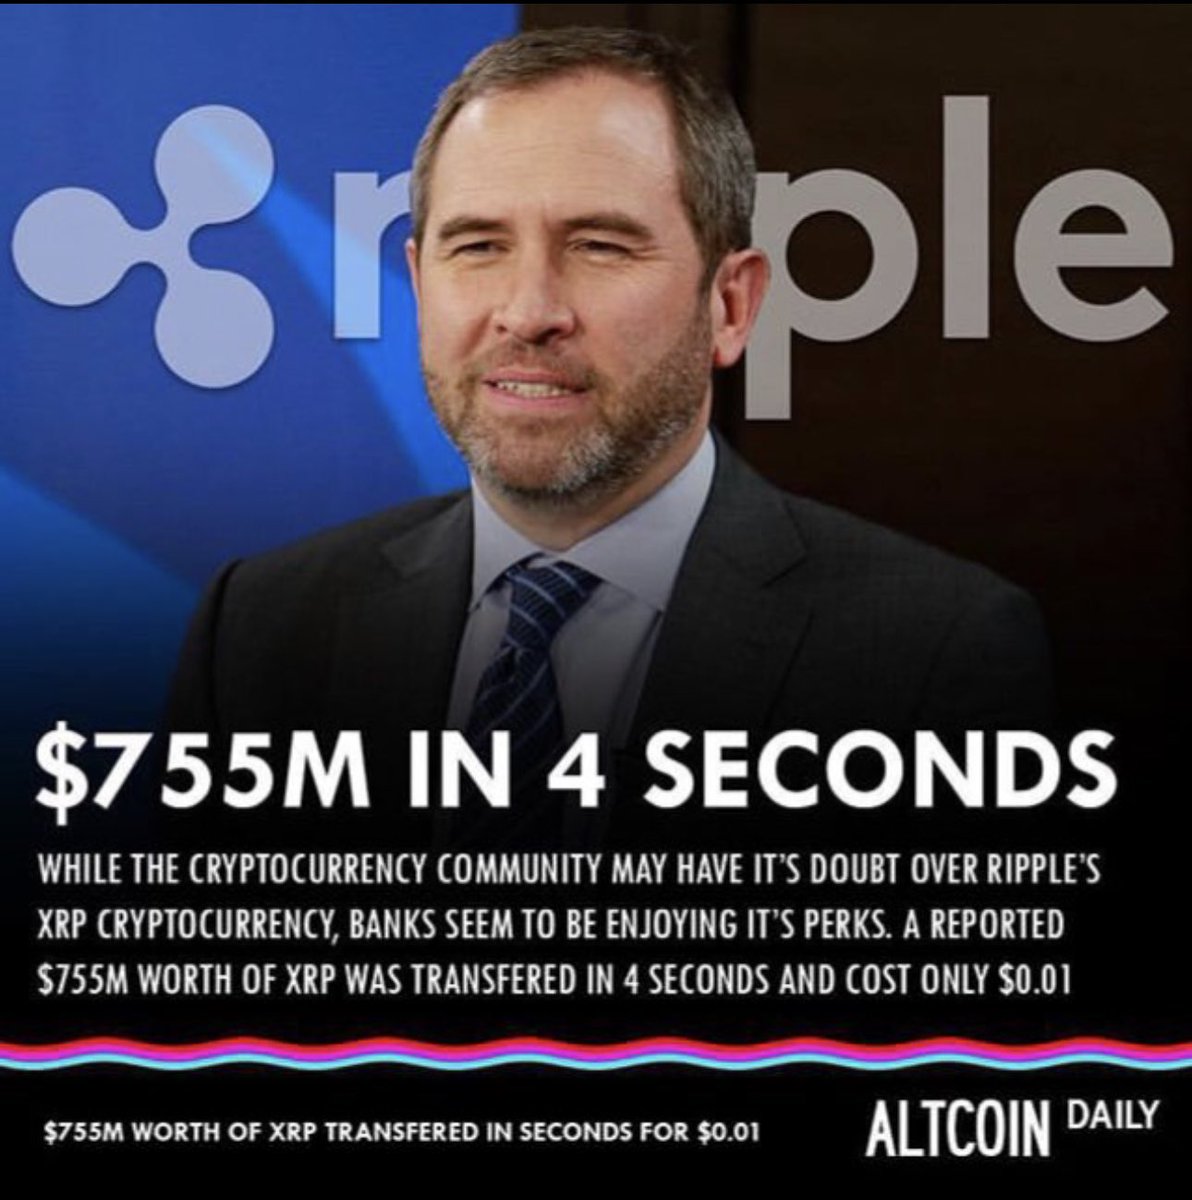 $755M IN 4 SECONDS 

$XRP and ODL to revolutionize the Financial System